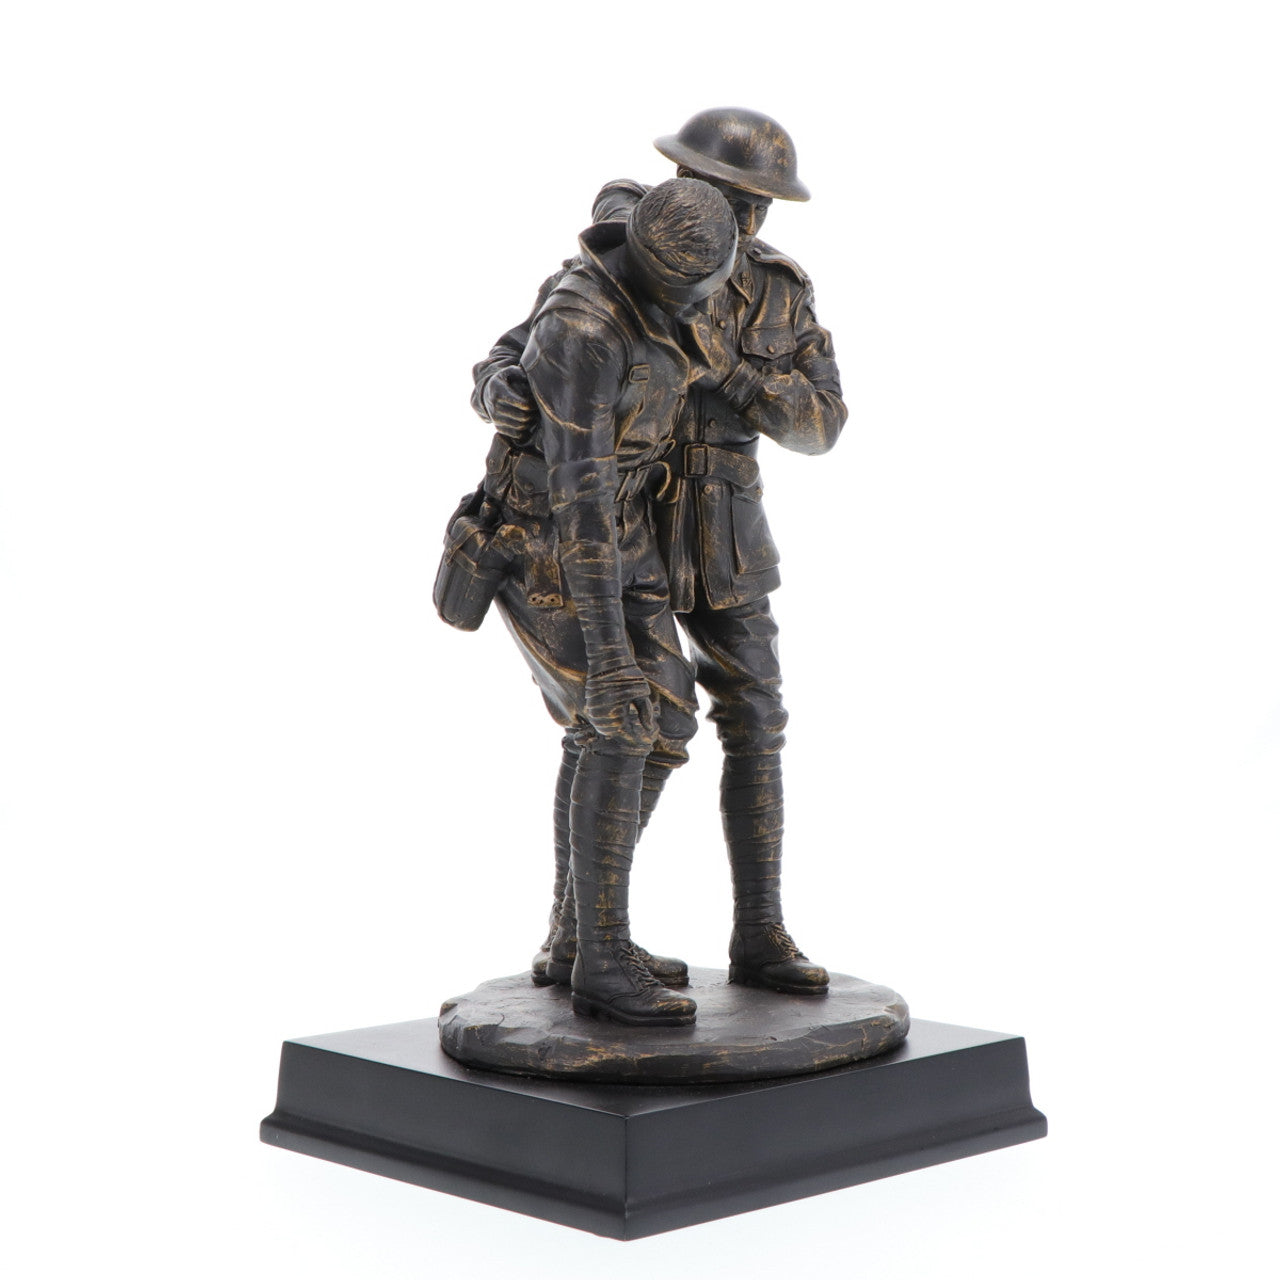 This evocative 300mm tall mounted limited edition cold cast bronze figurine pays tribute to the bravery and sacrifice of the Australian Imperial Force during the Great War 1914-1918. It serves as a poignant reminder of the immense toll the war took on Australia, with over 330,000 soldiers serving overseas and more than 62,000 losing their lives. www.defenceqstore.com.au